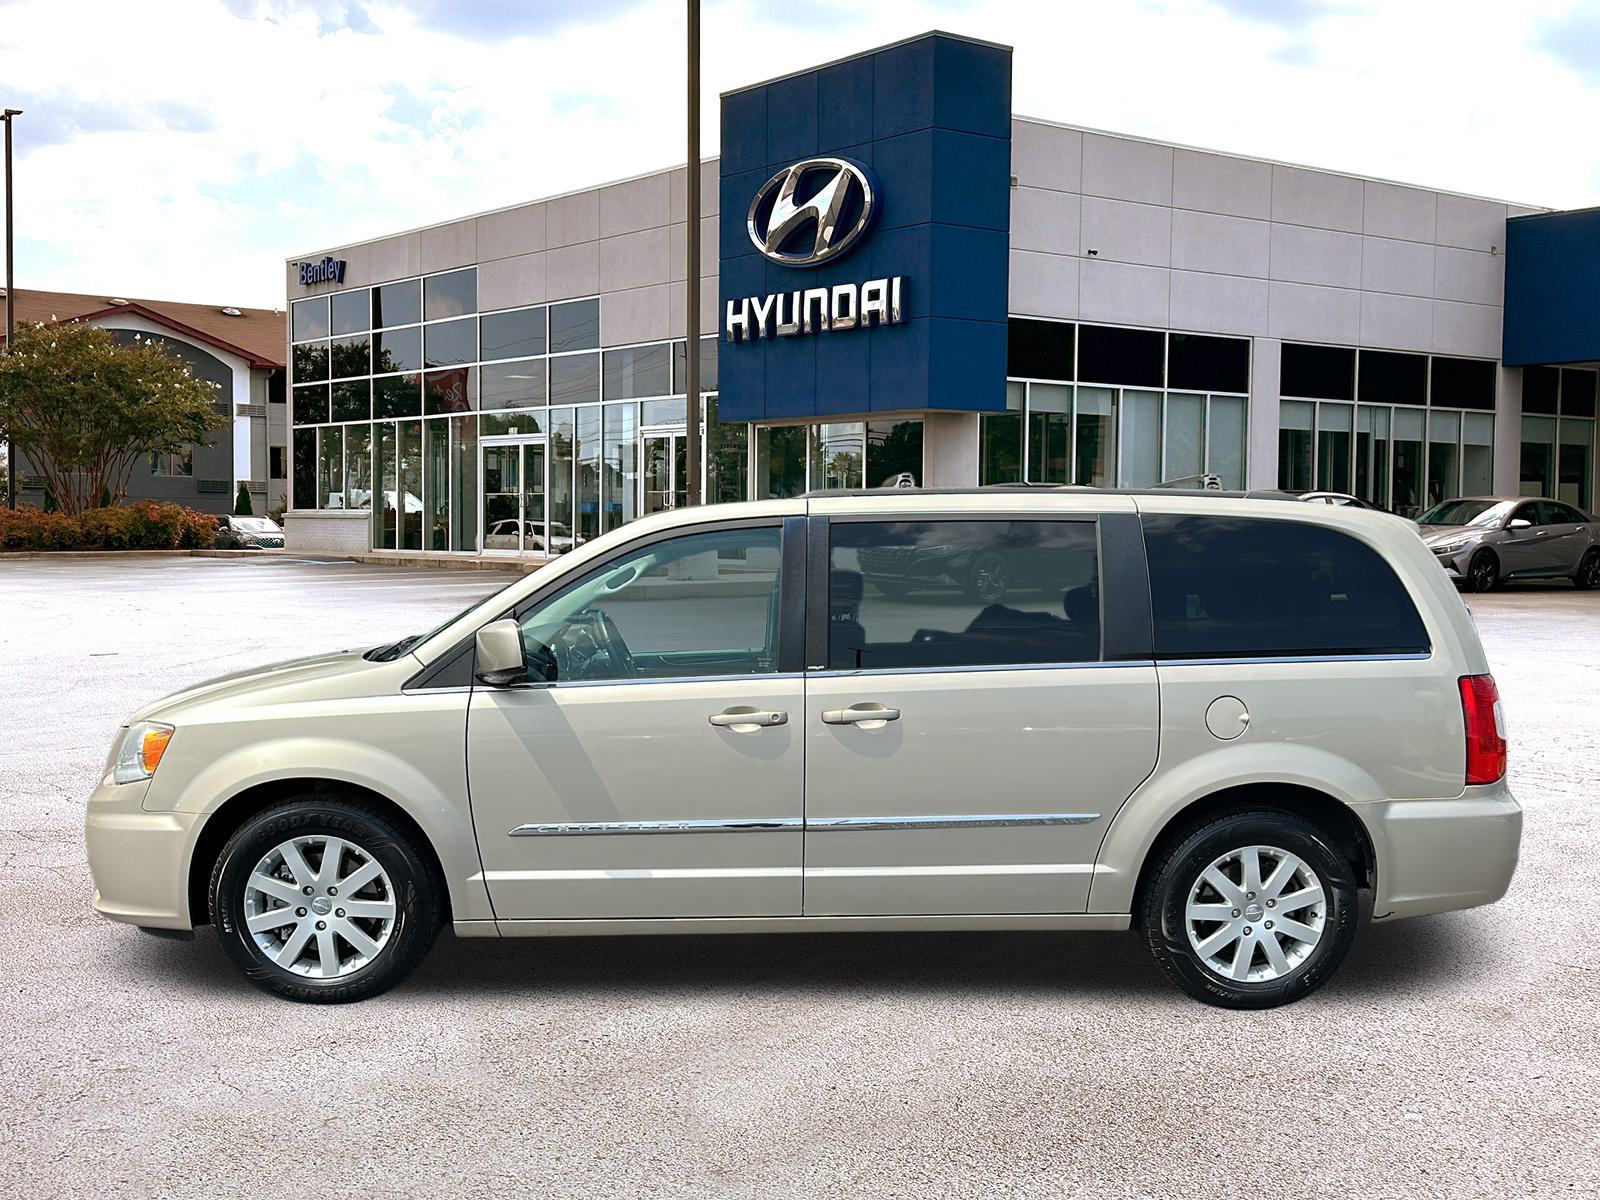 2014 Chrysler Town & Country Touring 2